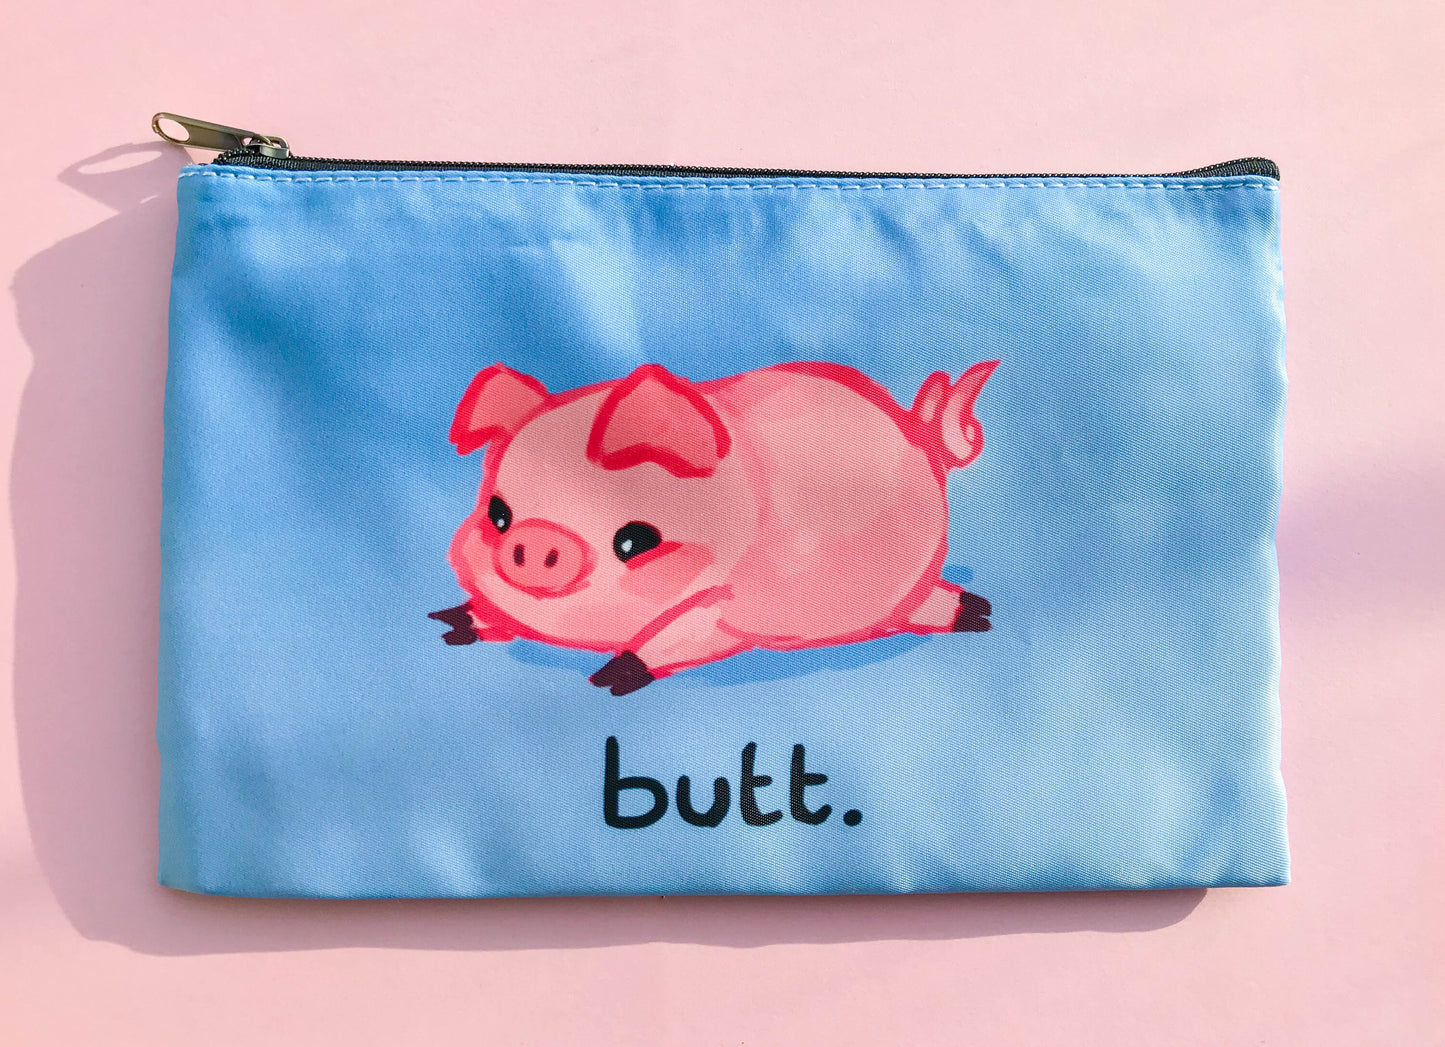 Cute Pig Zipper Pouch - Butt - Stationery or Cosmetic Bag